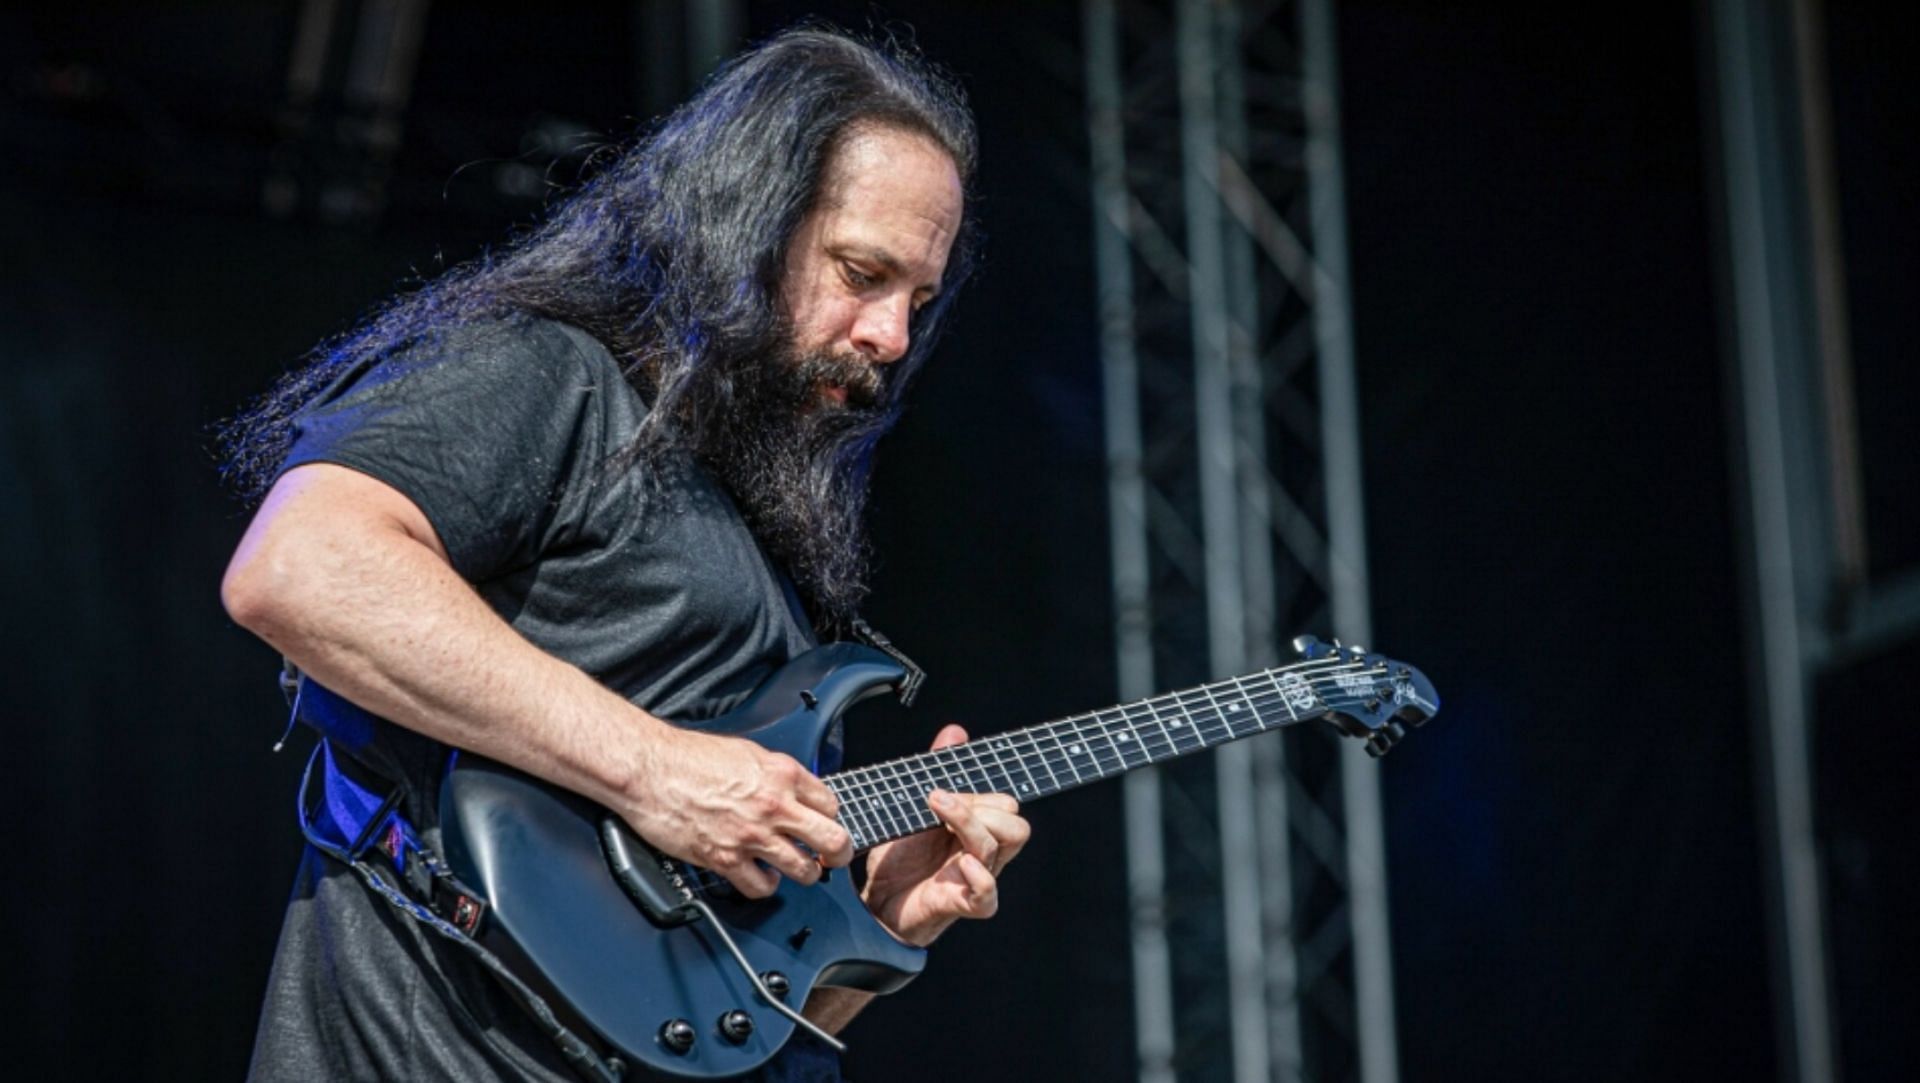 John Petrucci 2022 tour Dates, tickets, where to buy and more